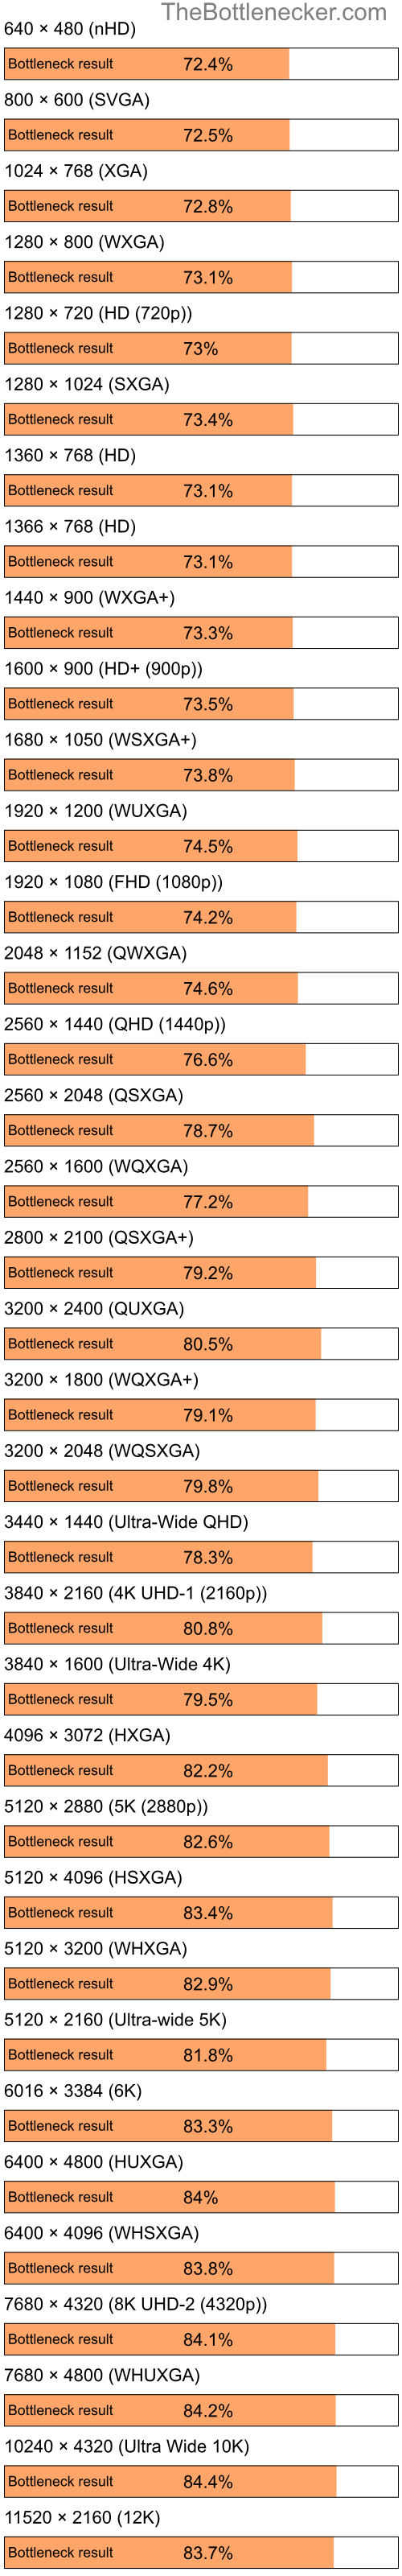 Bottleneck results by resolution for Intel Atom N280 and NVIDIA nForce 630a in Processor Intense Tasks